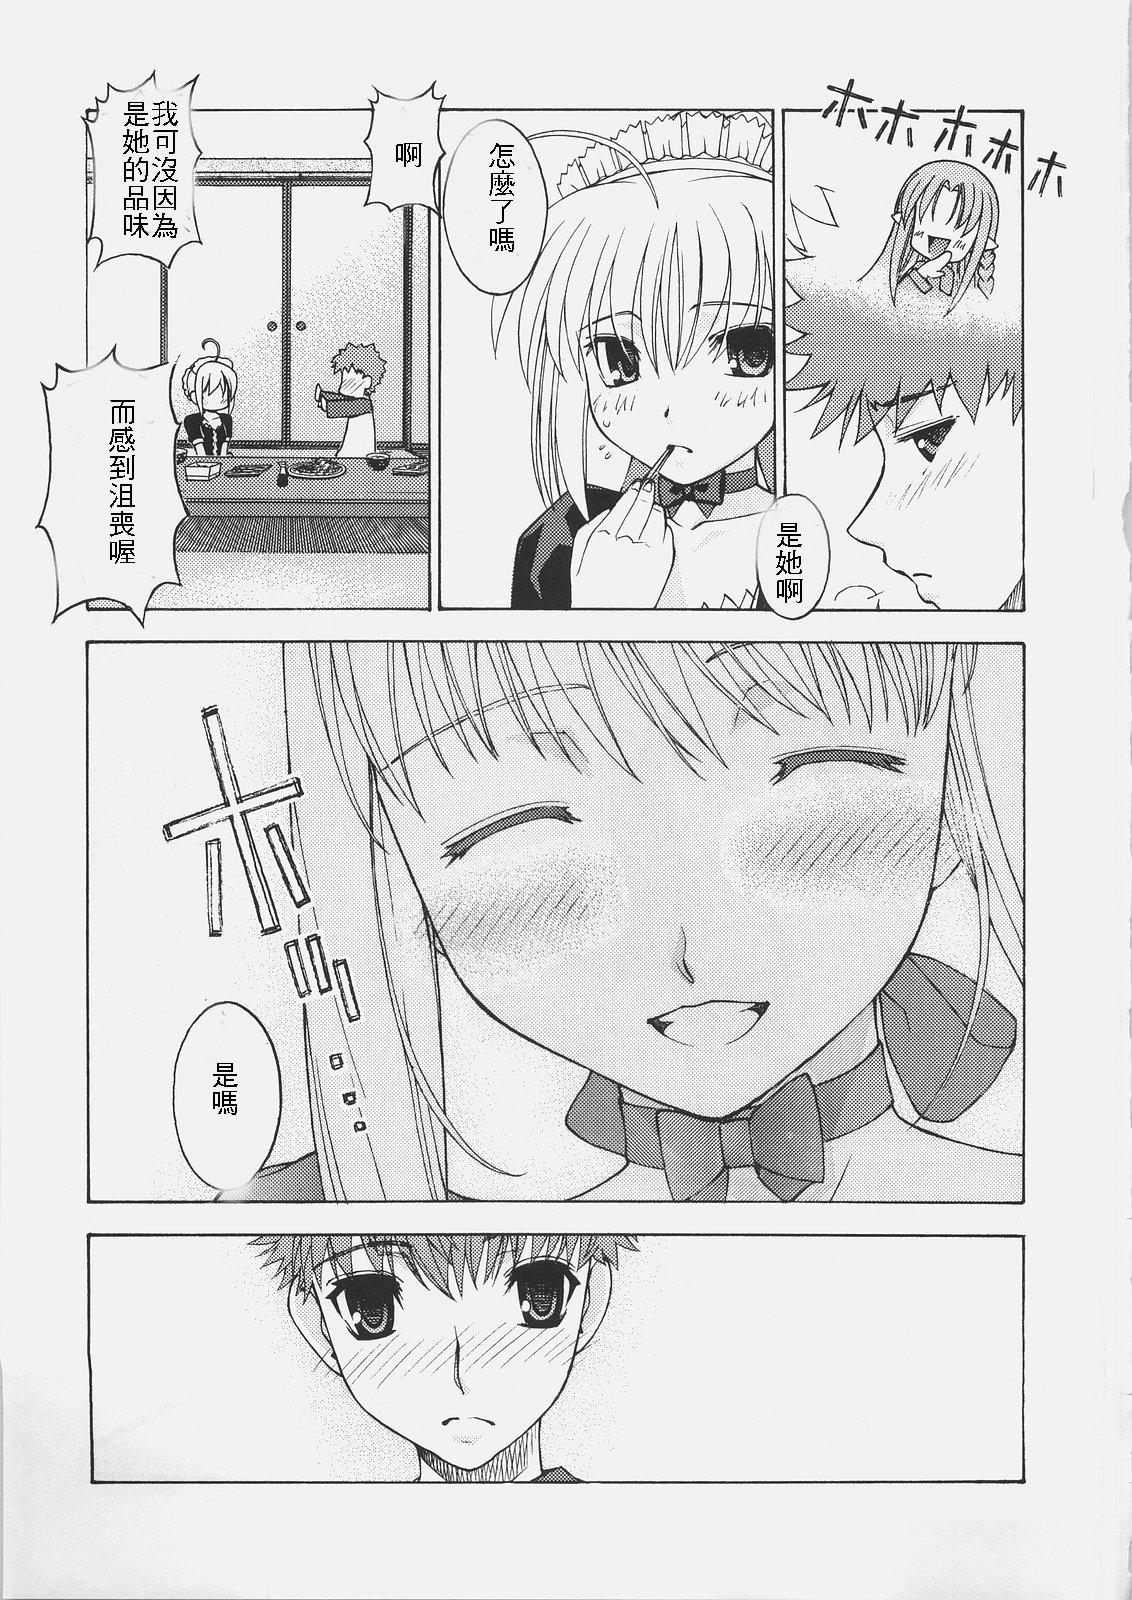 Hidden Cam HUNGRY LOVER - Fate stay night Abuse - Page 7